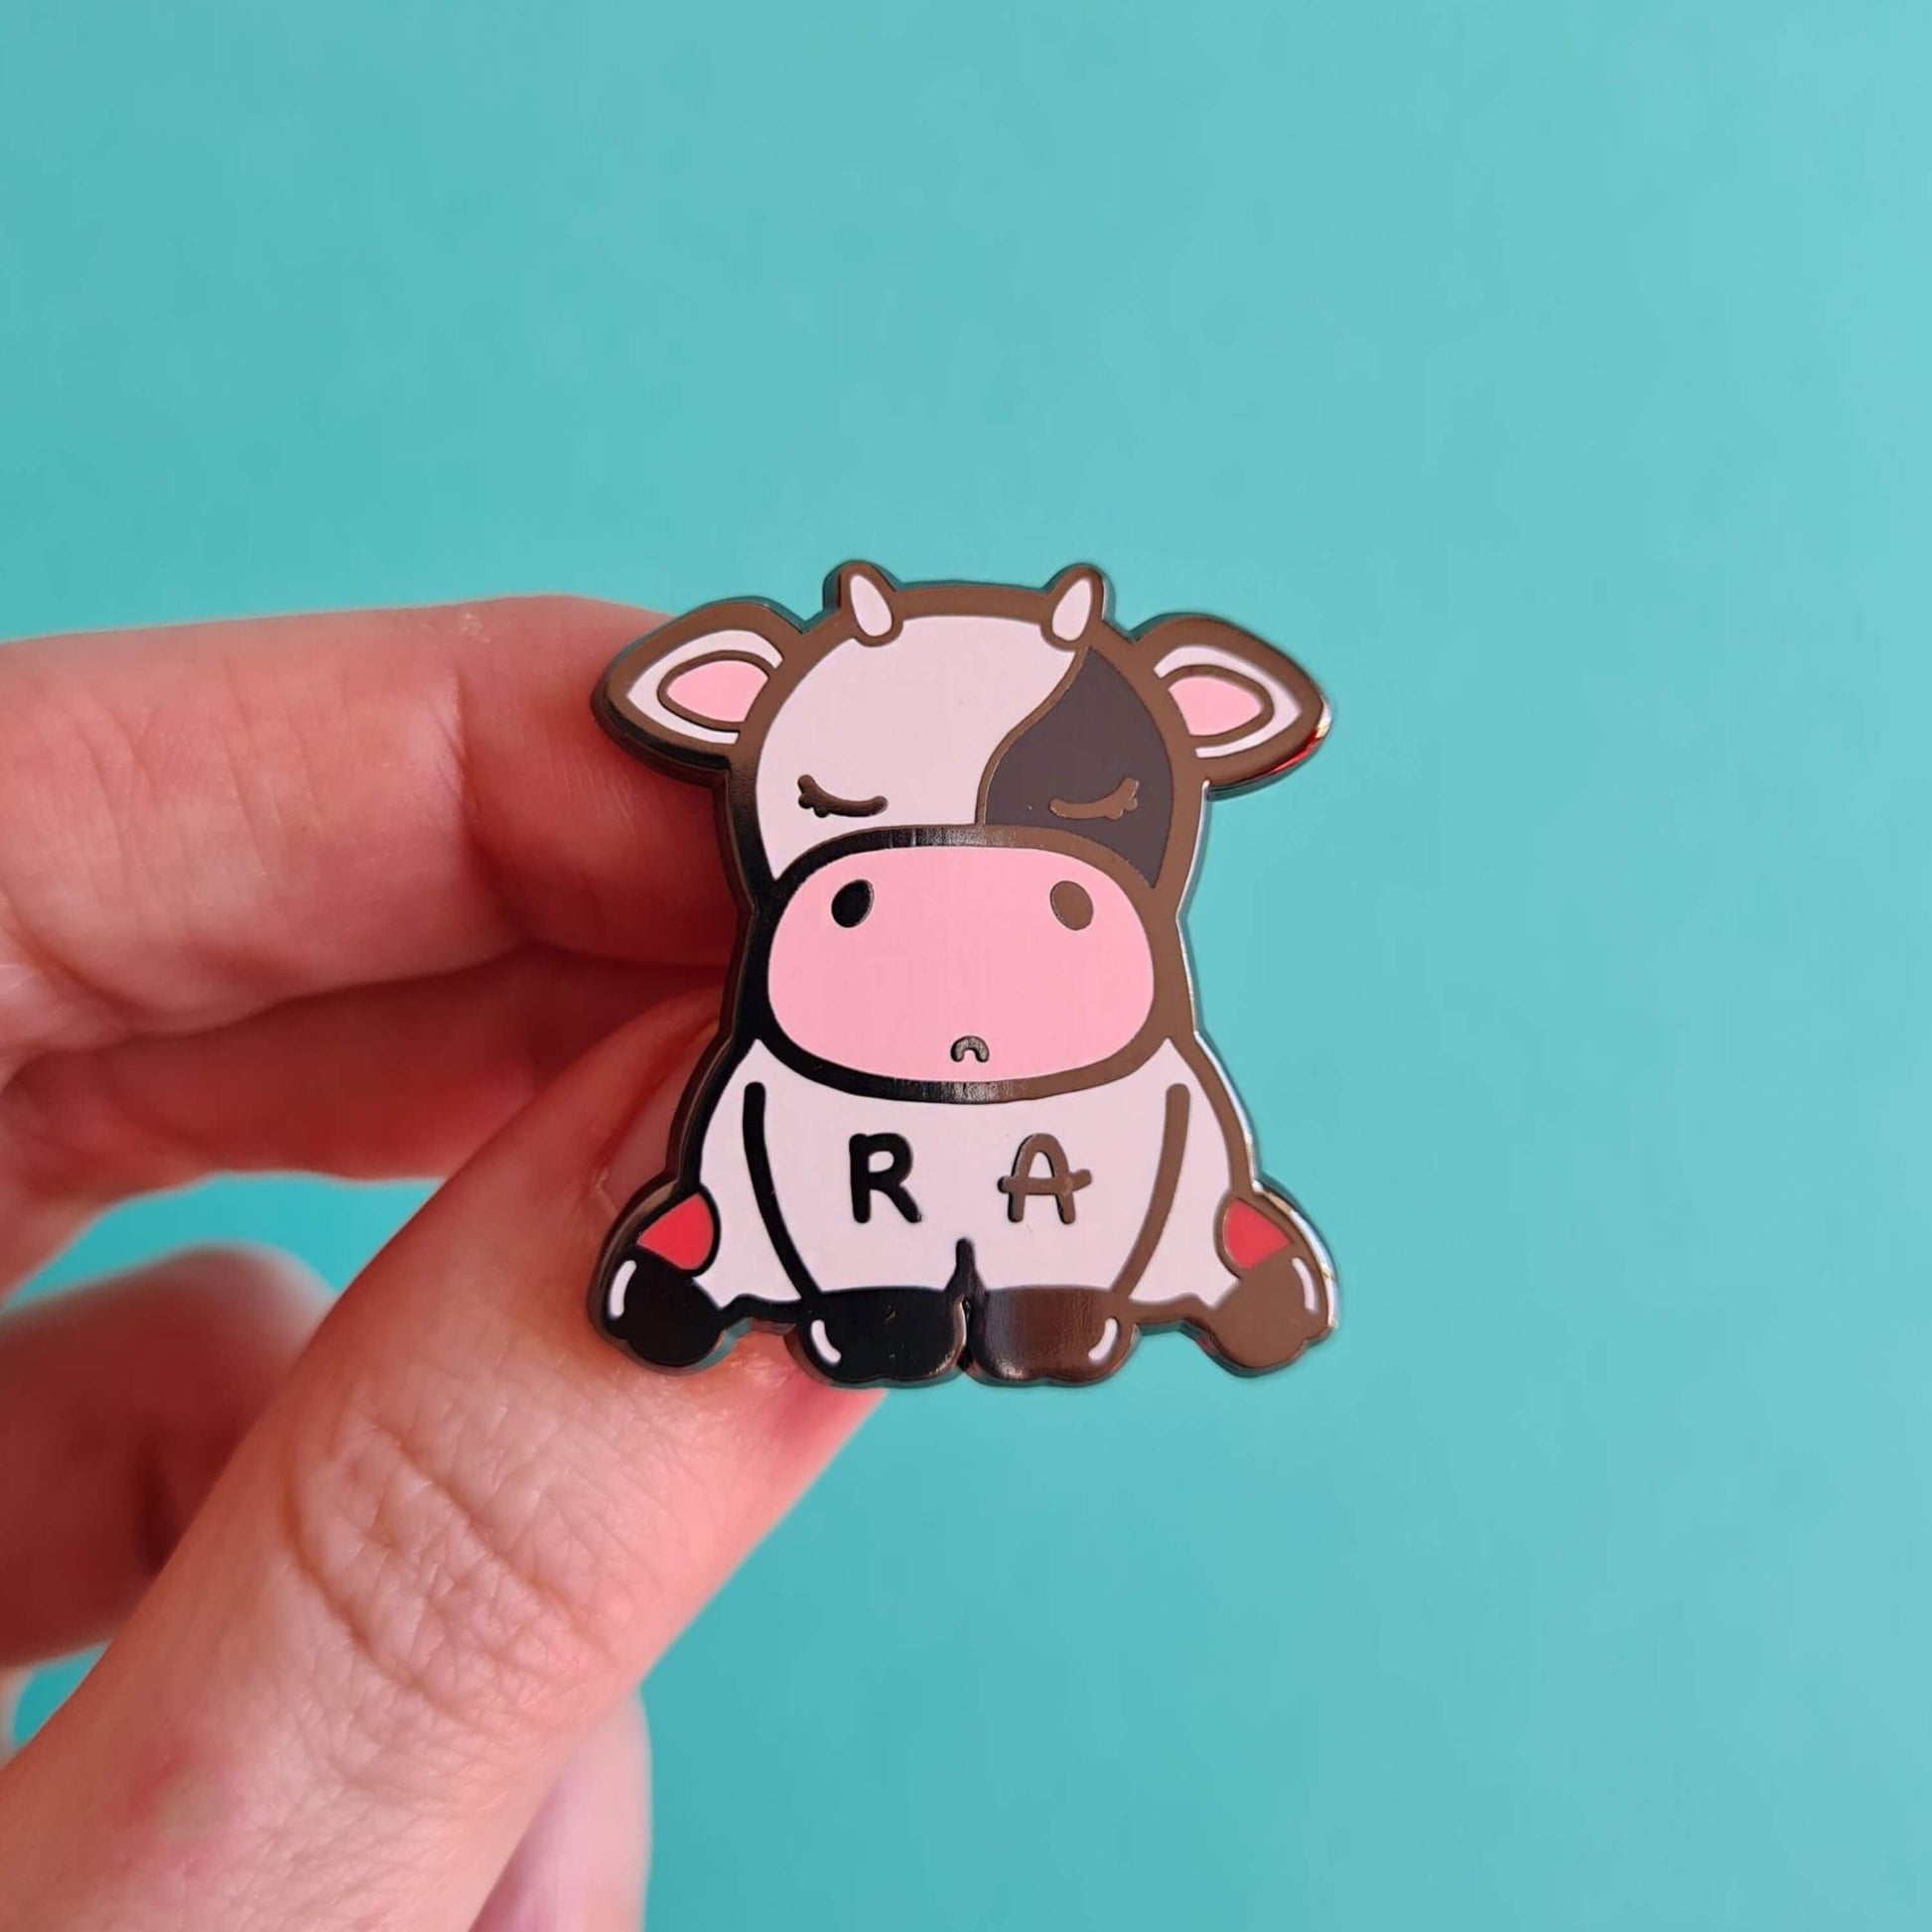 The Moomatoid Arthritis Cow Enamel Pin - Rheumatoid Arthritis held over a blue background. The sad cow shape pin has red marks on its lower back legs and the initials R and A across its middle. The hand drawn design is raising awareness for Rheumatoid Arthritis.